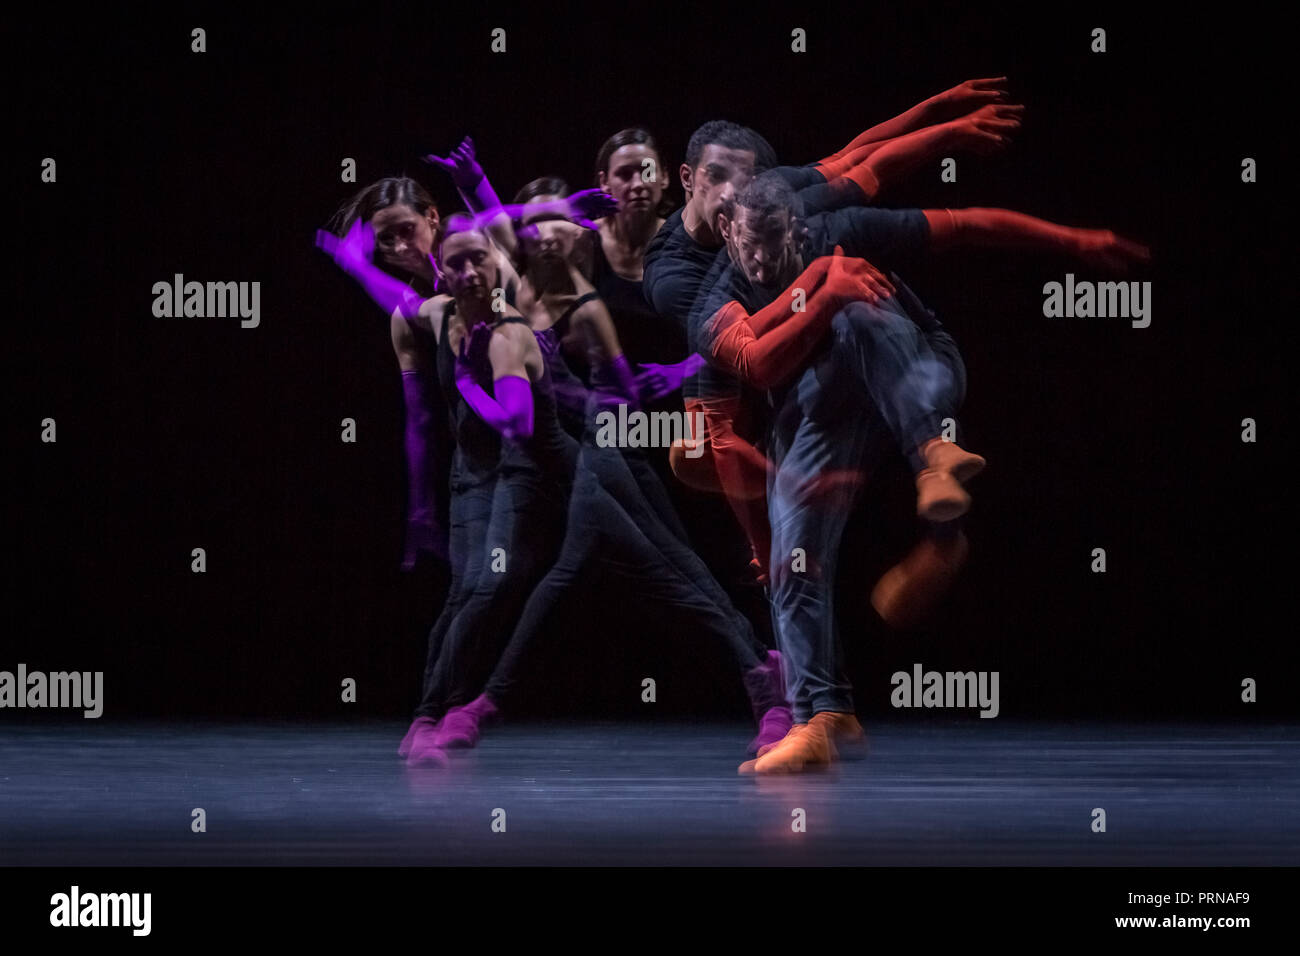 London, UK. 3rd Oct 2018. William Forsythe – A Quiet Evening of Dance at Sadler’s Wells. Credit: Guy Corbishley/Alamy Live News Stock Photo